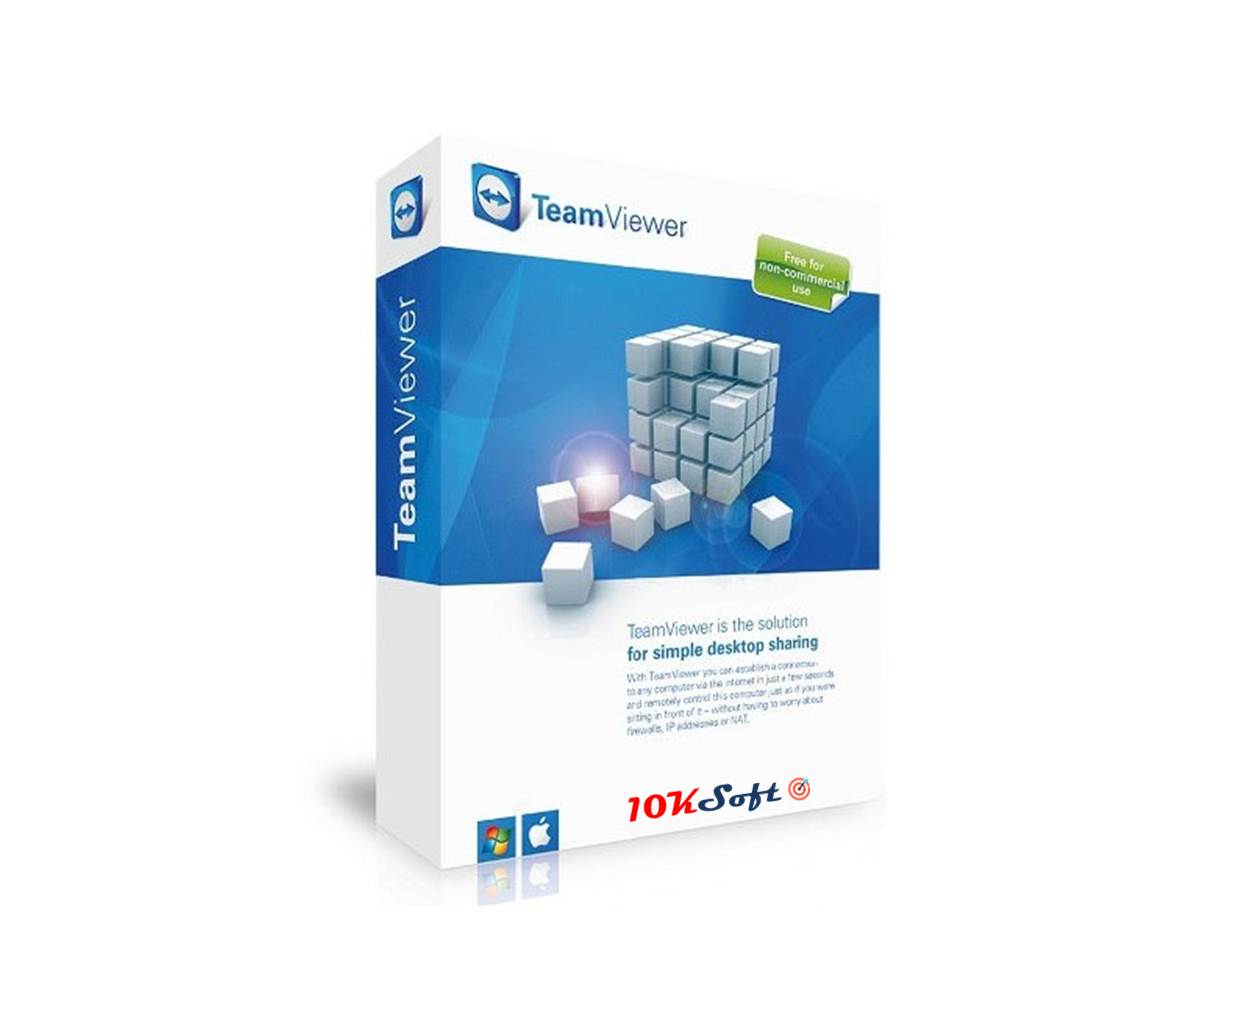 teamviewer 8 for windows 7 free download